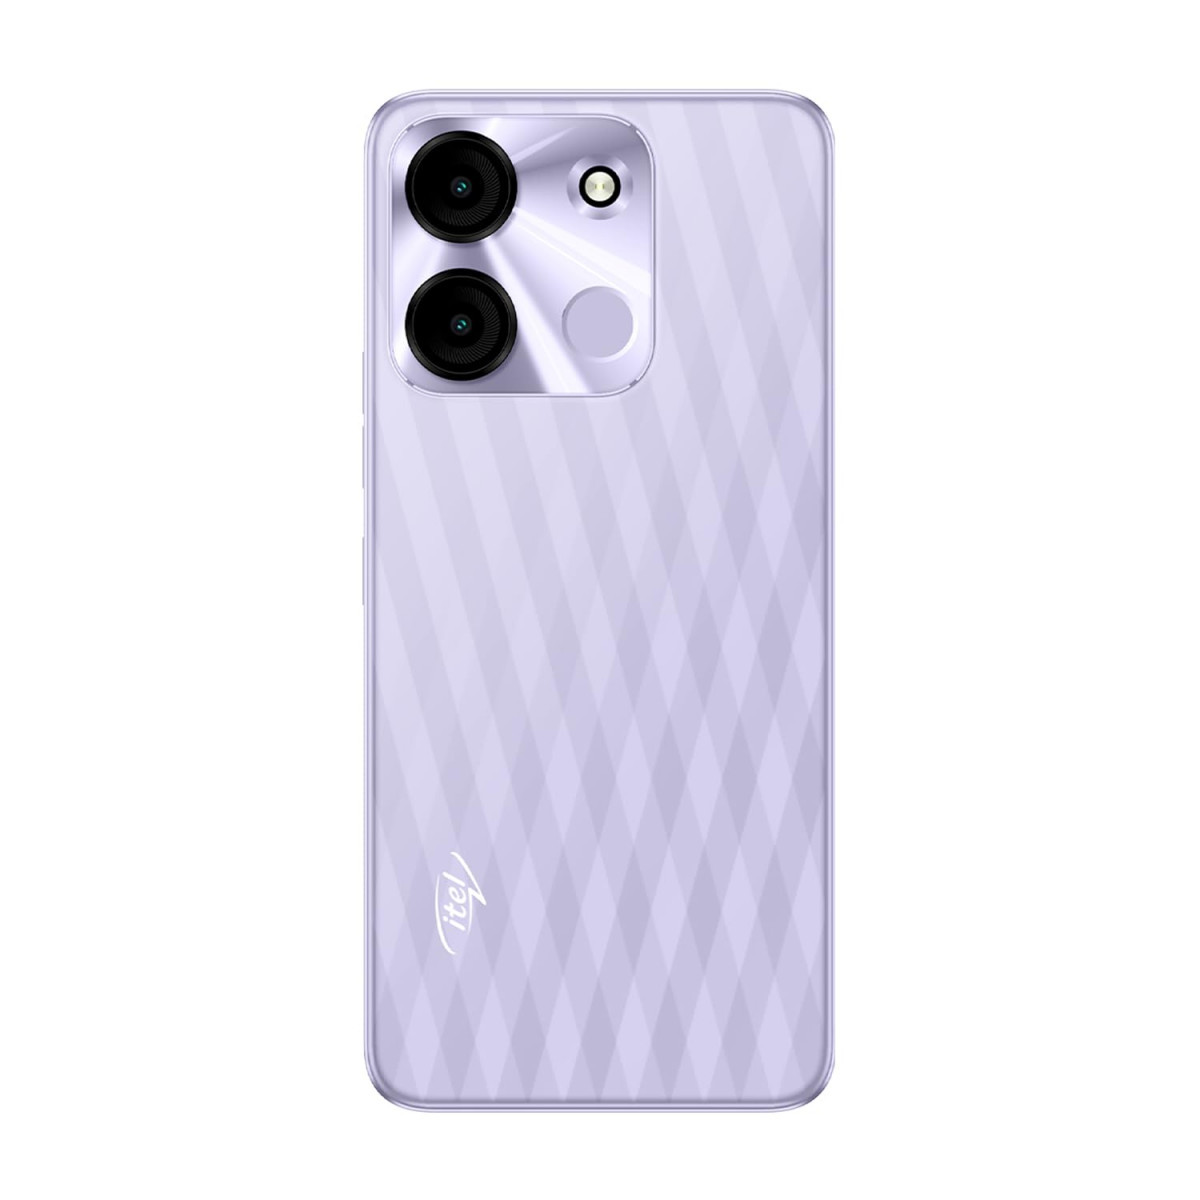 itel A60s 4GB RAM  64GB ROM Up to 8GB RAM with Memory Fusion  8MP AI Rear Camera  5000mAh Battery with 10W Charging  Faceunlock  Fingerprint - Moonlit Violet